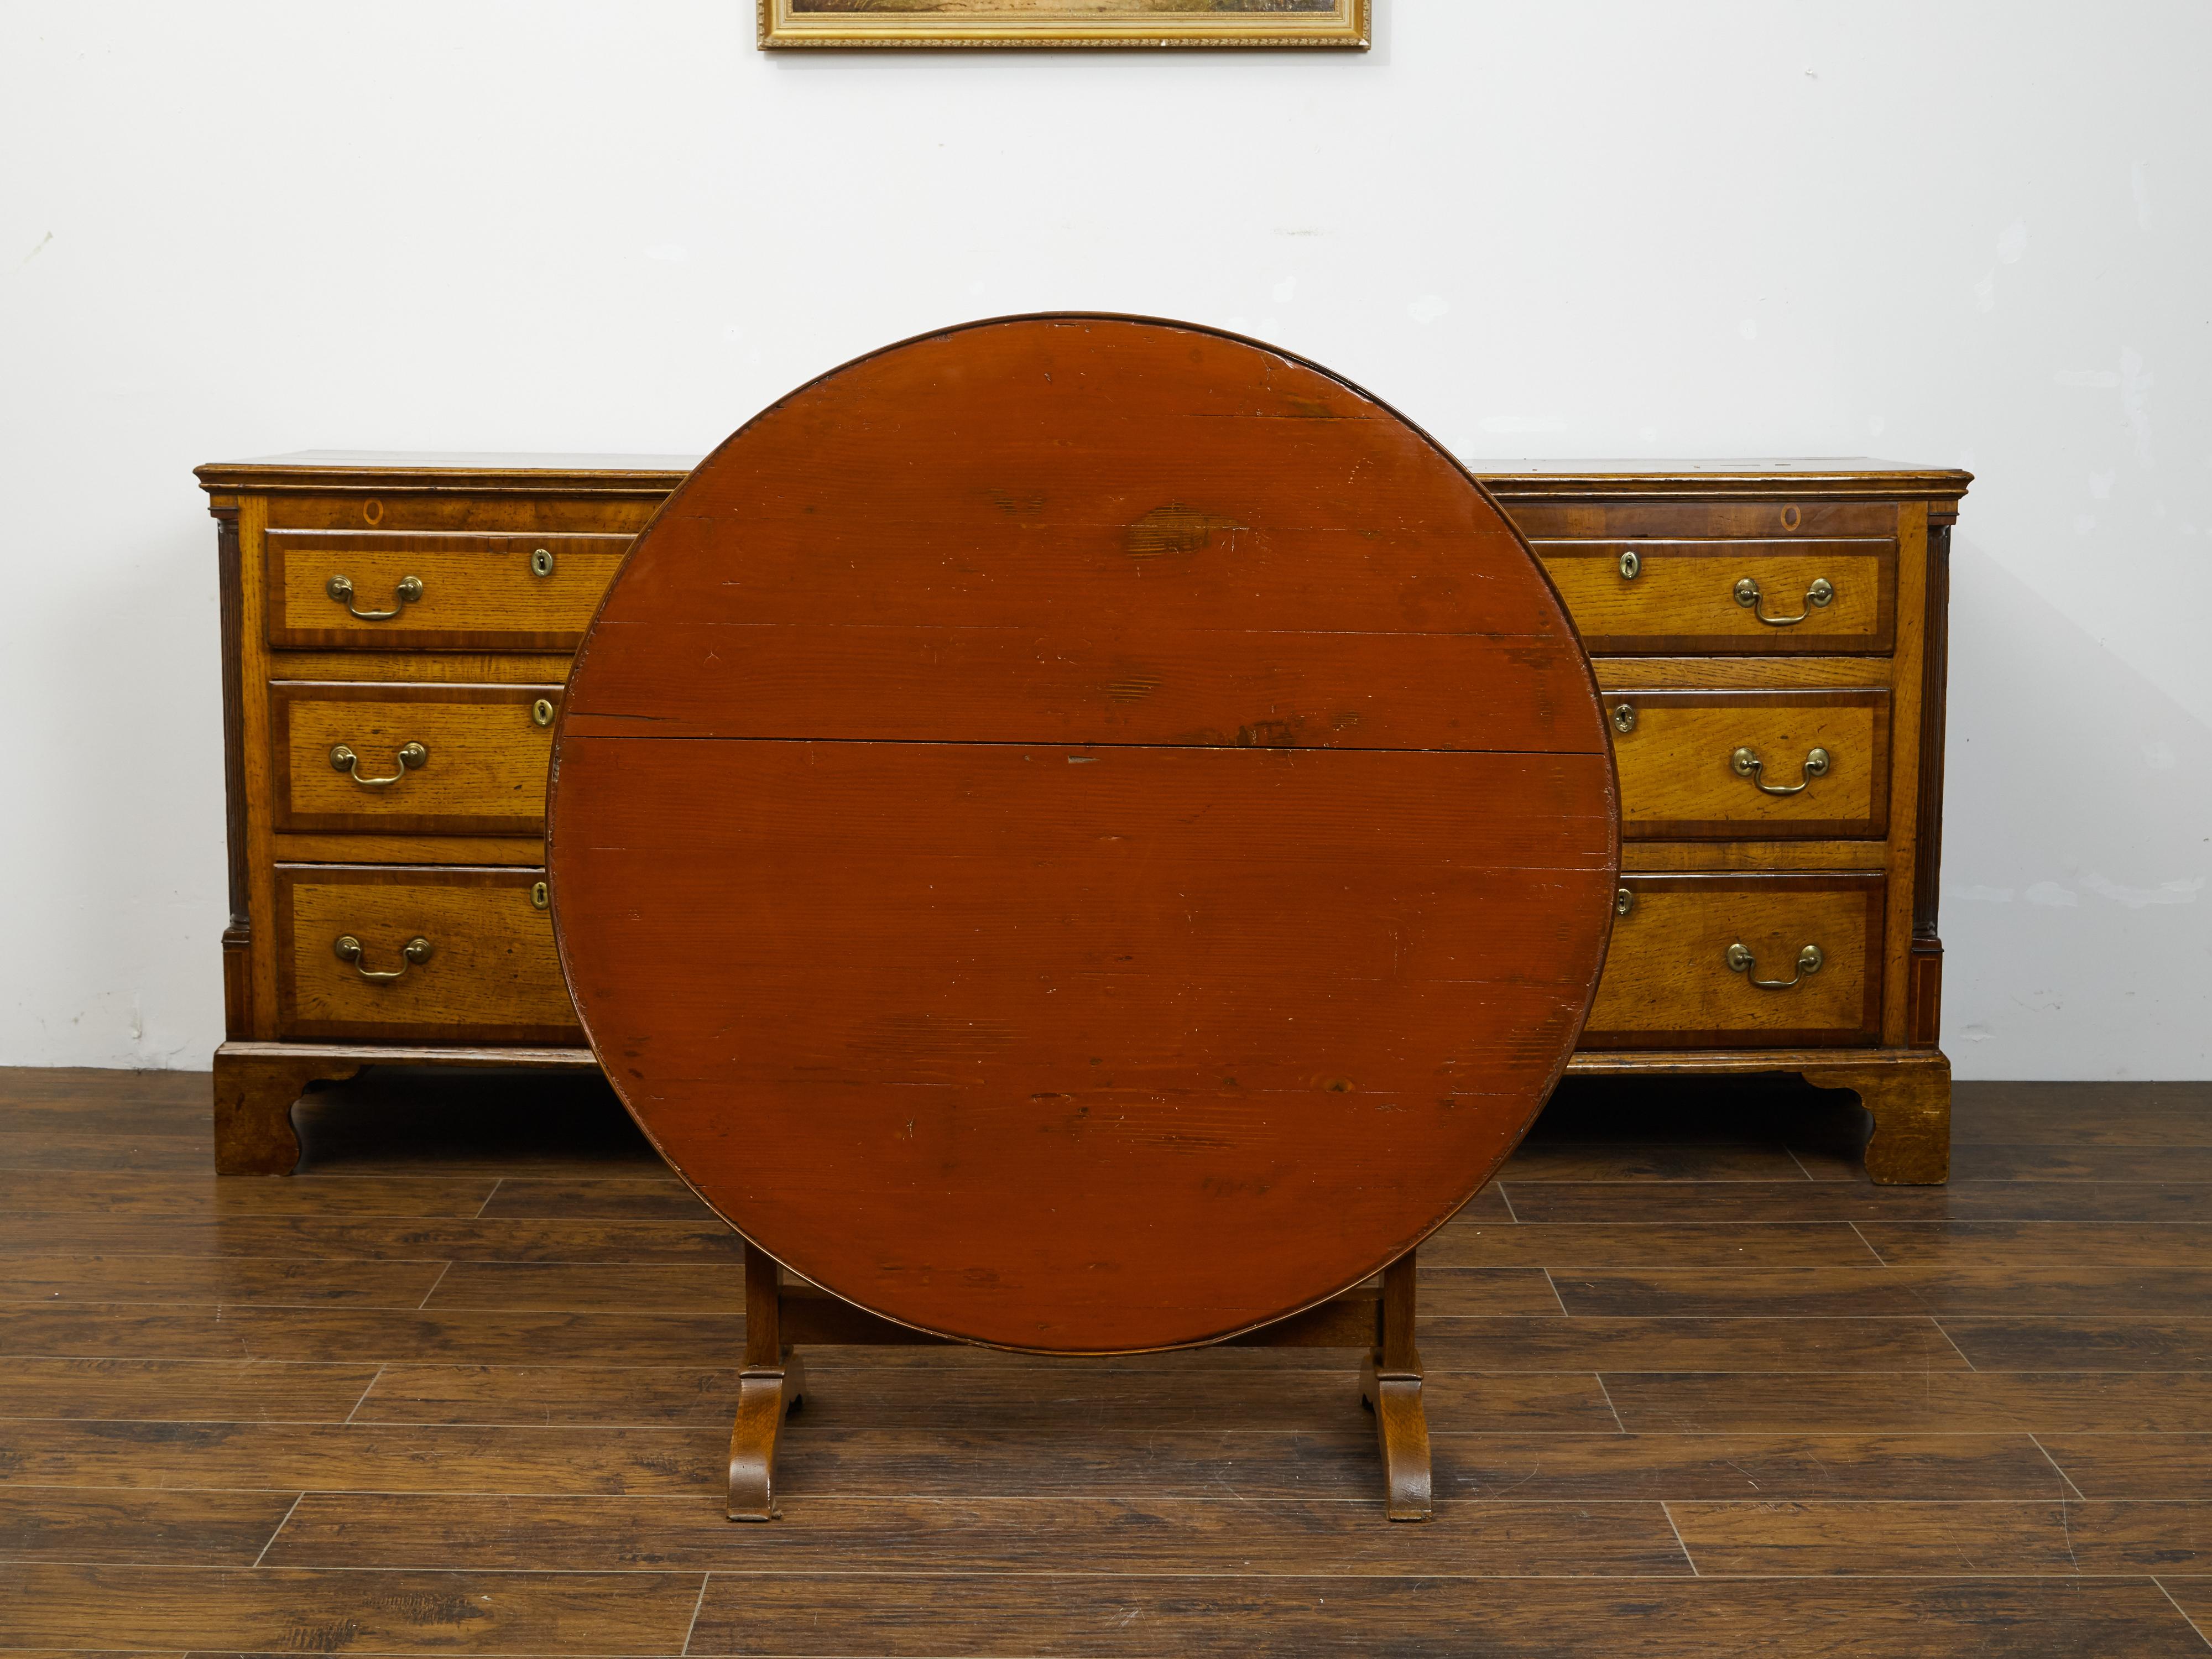 A French painted wood wine tasting table from the late 19th century, with circular top, trestle base and wedge. Created in France during the last quarter of the 19th century, this painted wine tasting table features a round planked tilt-top, sitting